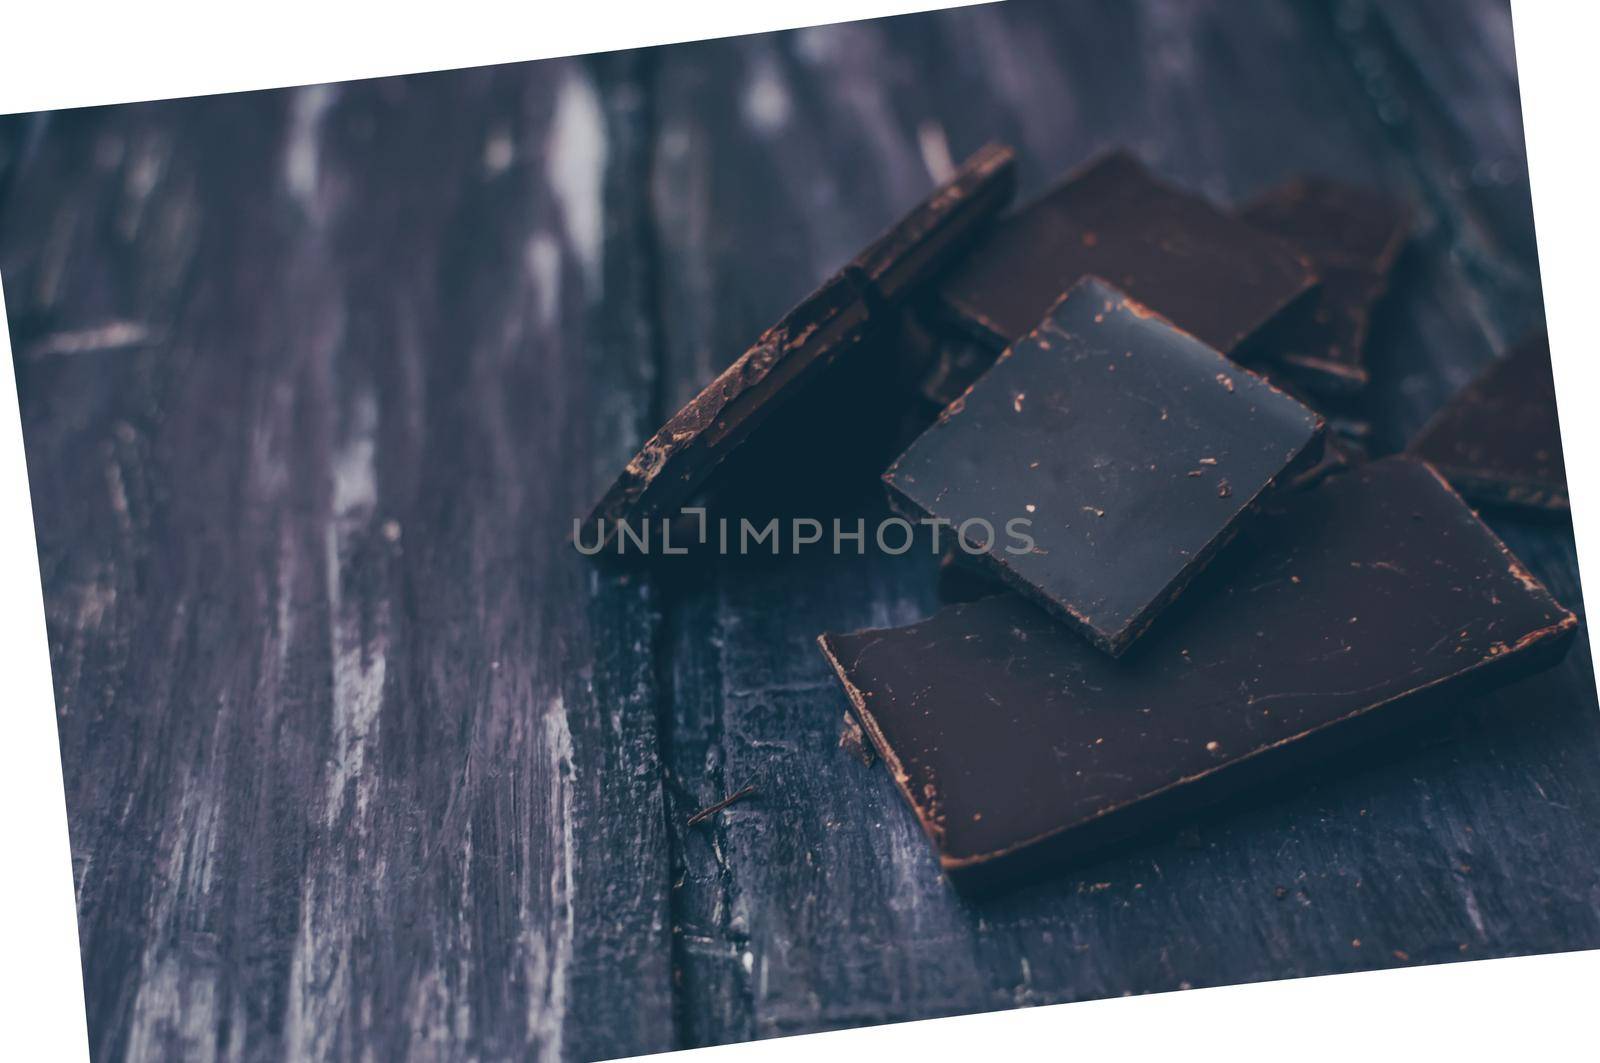 dark chocolate without sugar and gluten free for diabetics and allergics. Pieces of chocolate on a dark rustic table. Photo in a white frame at an angle. Copy space